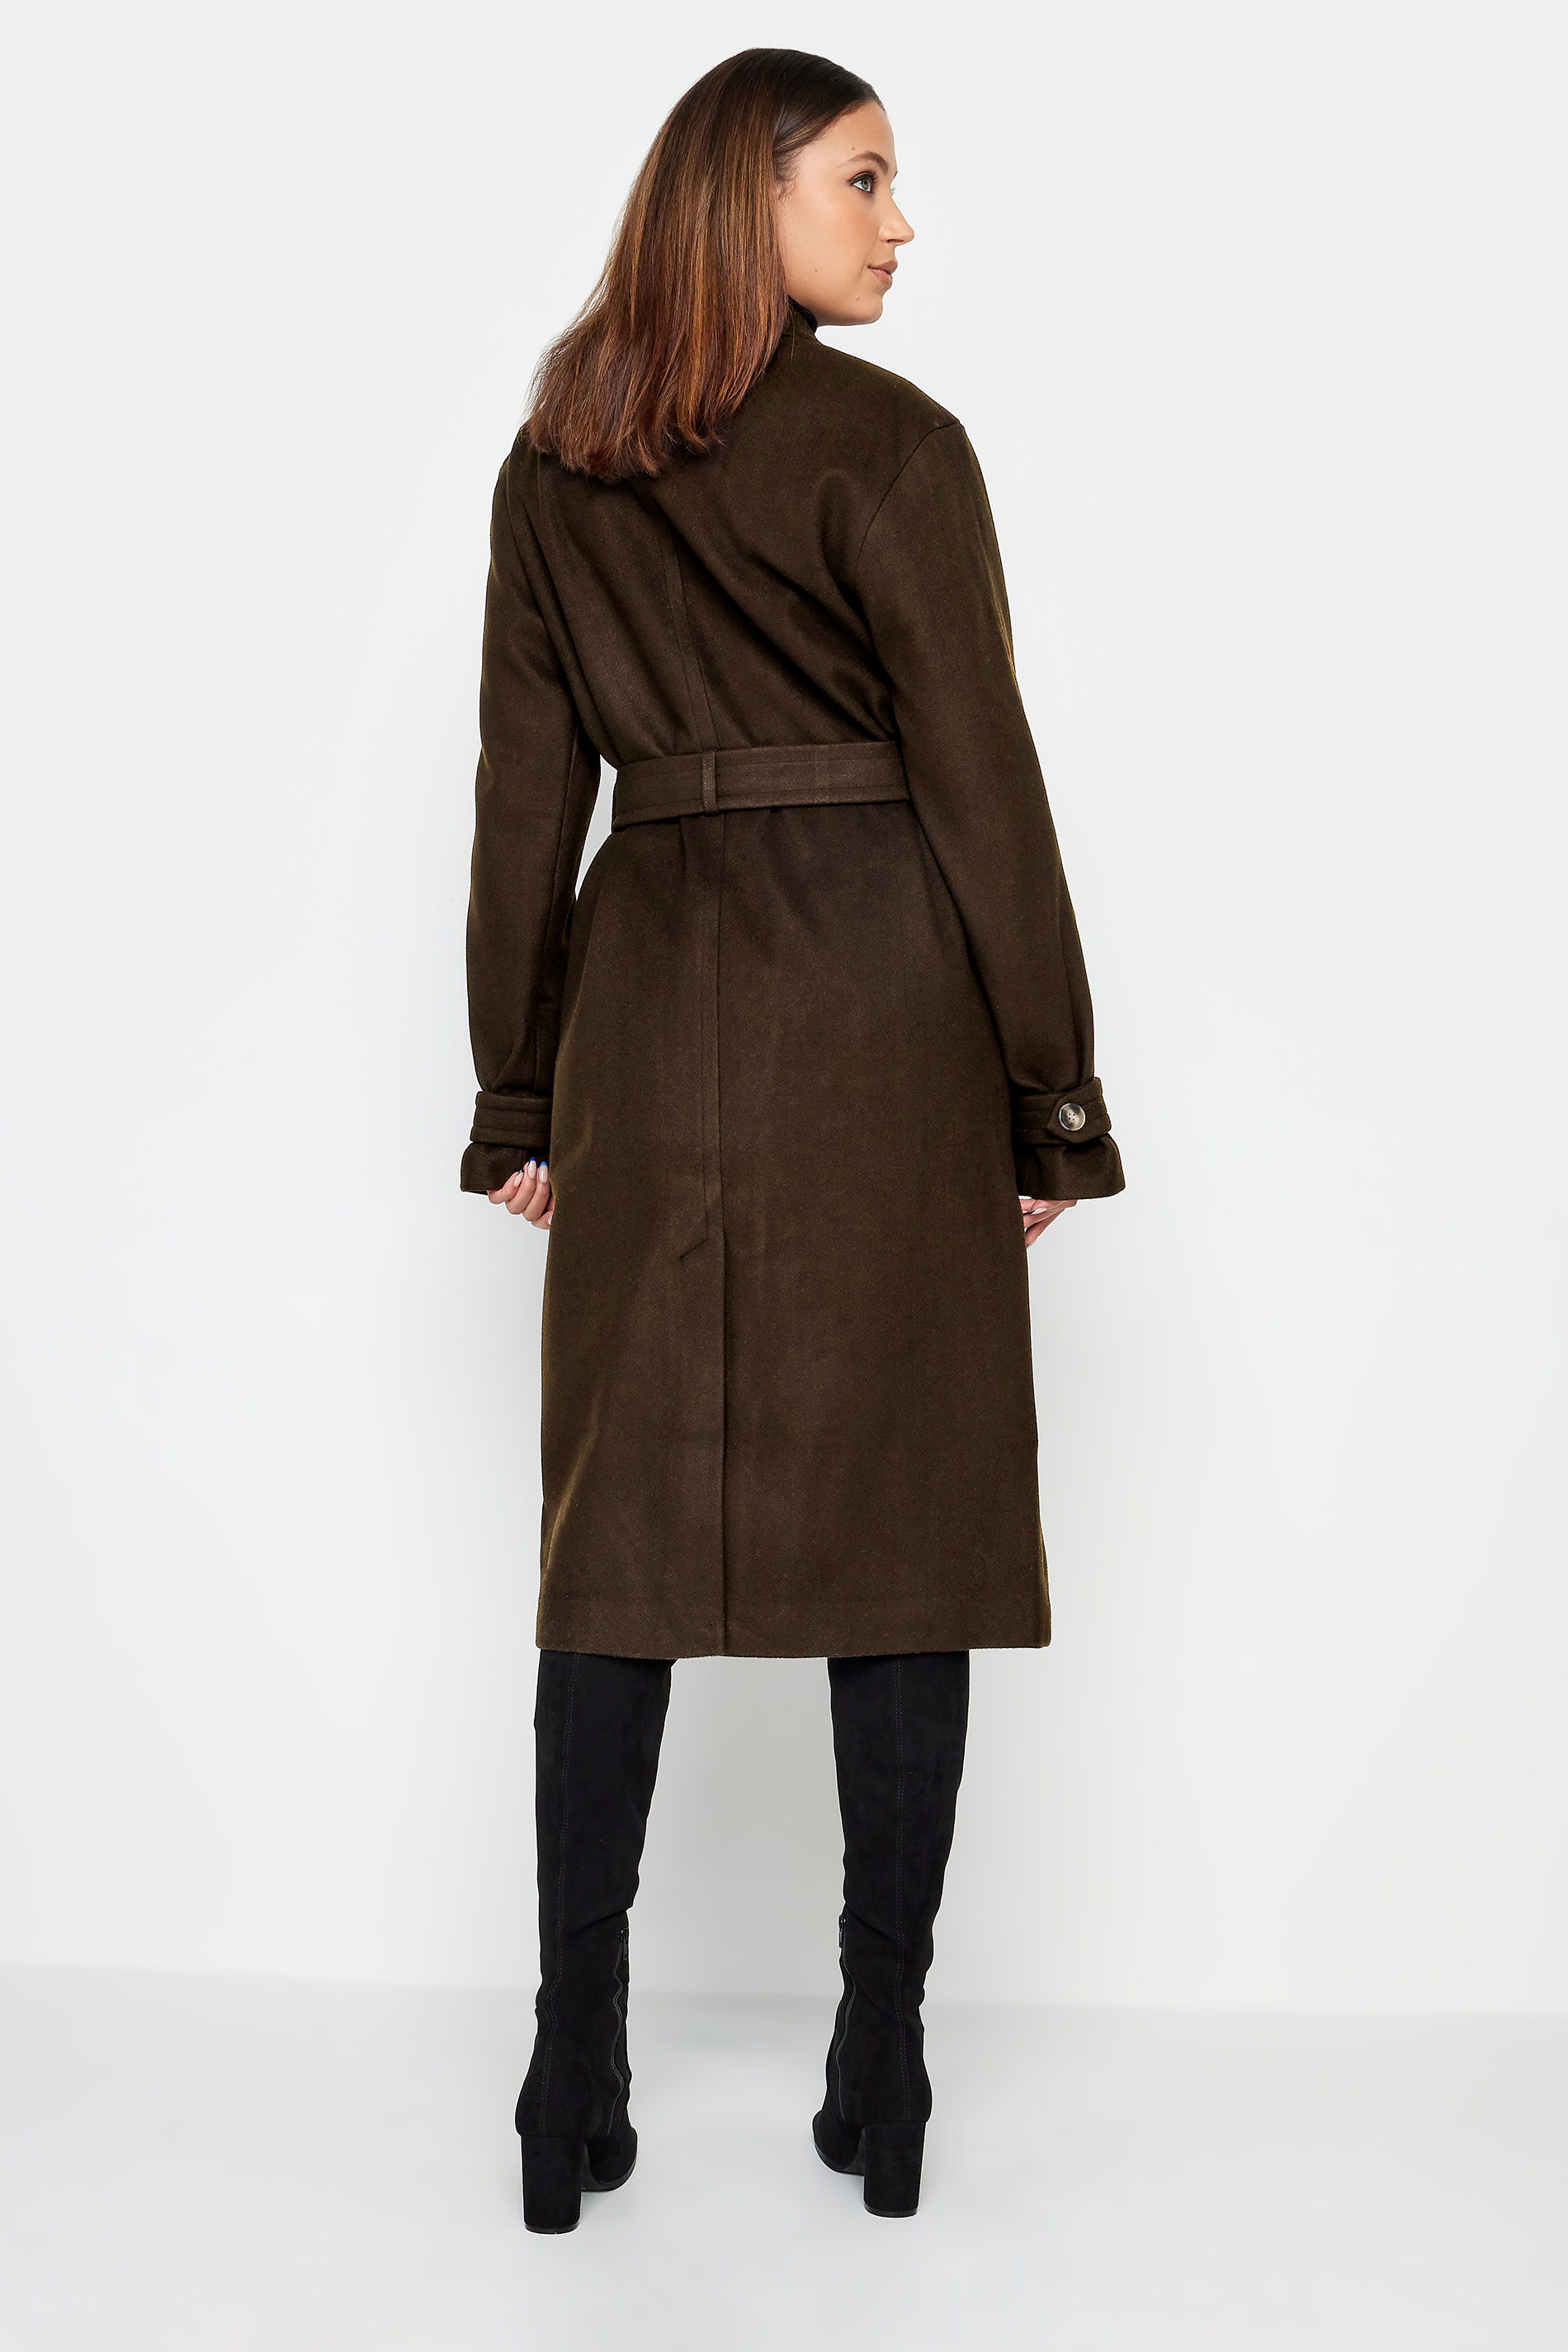 LTS Tall Womens Chocolate Brown Formal Trench Coat | Long Tall Sally 3